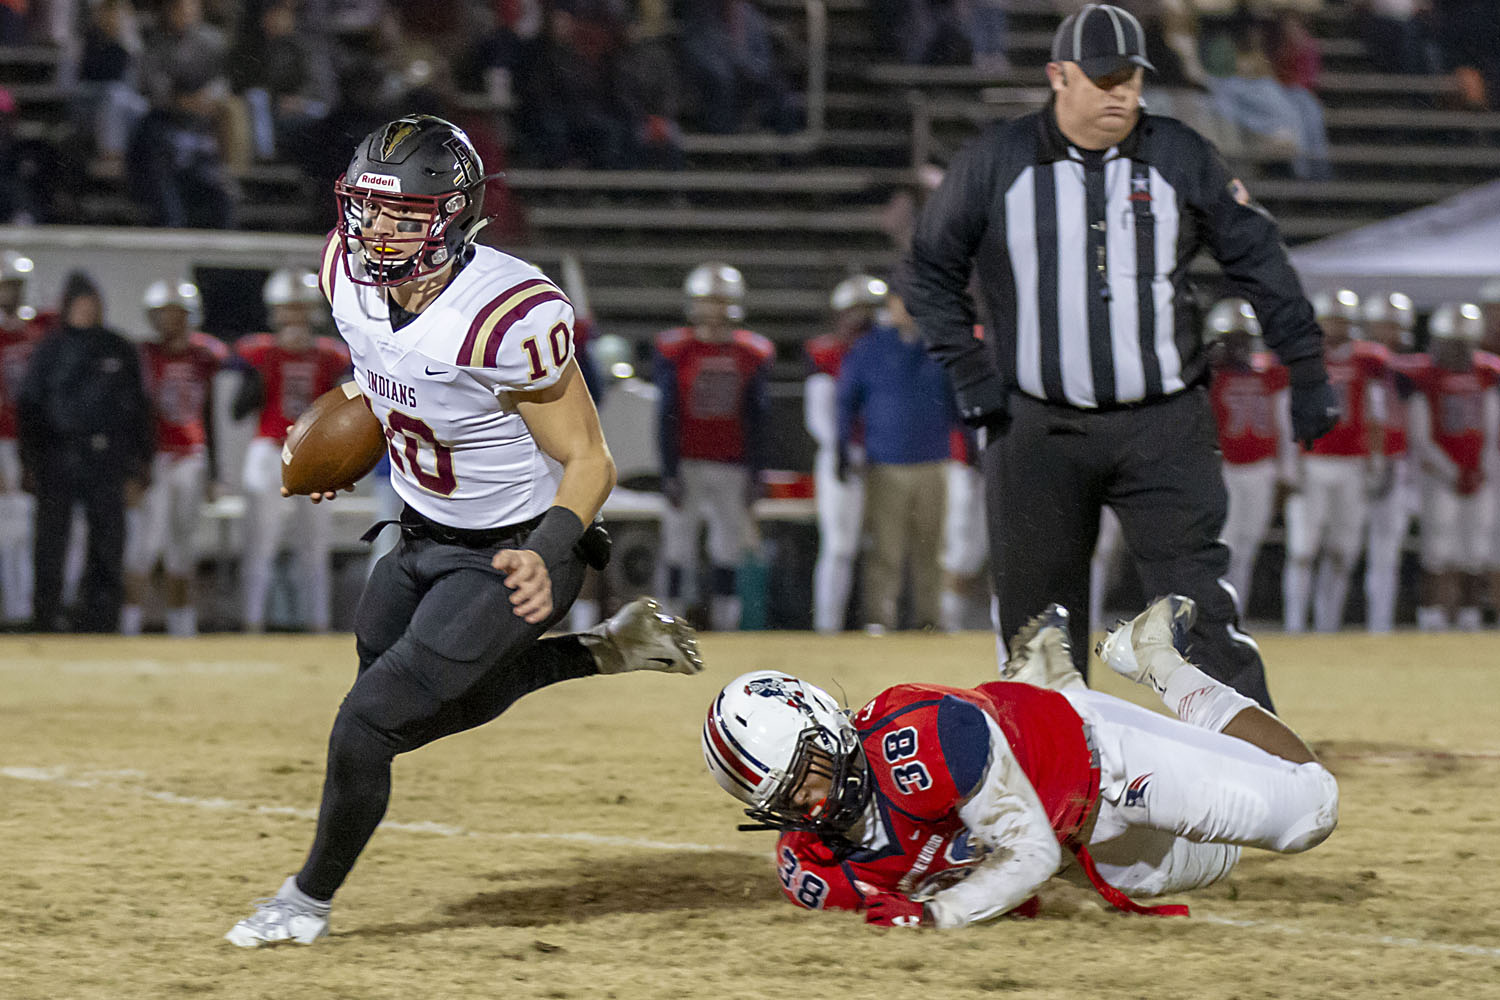 Indians dominate Patriots 48-7, advance to semifinals for rematch against Clay